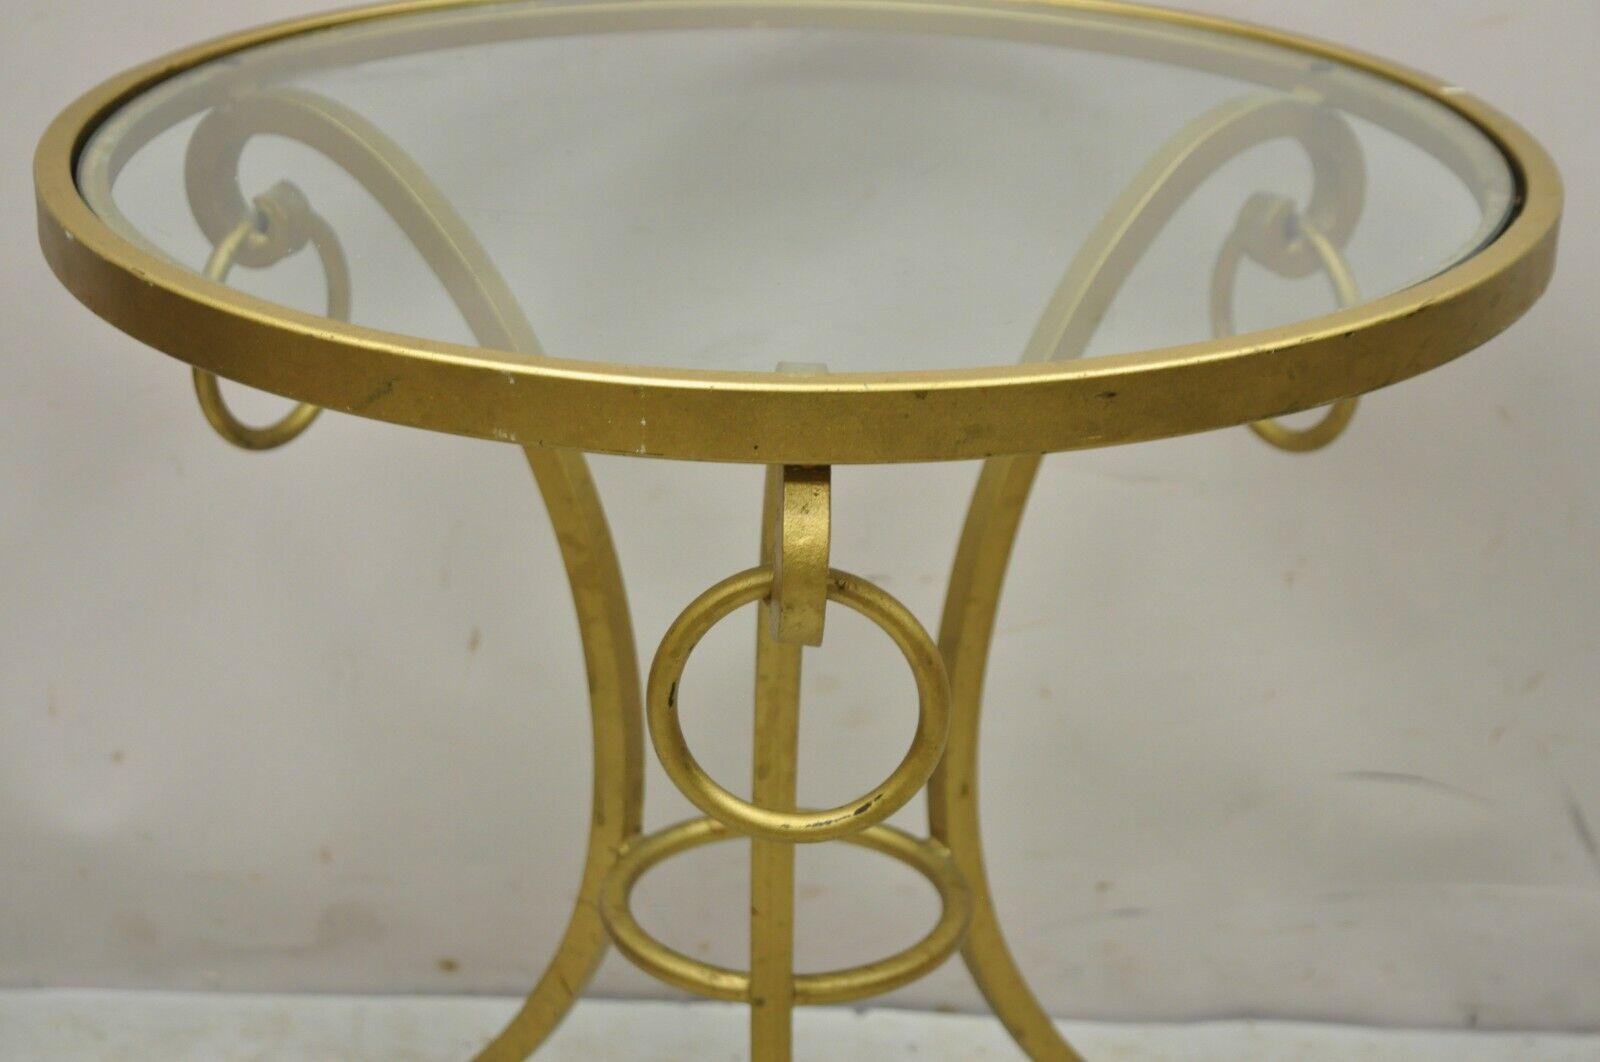 Decorator Gold Italian Neoclassical Style Hoof Foot Round Occasional Side Table In Good Condition For Sale In Philadelphia, PA